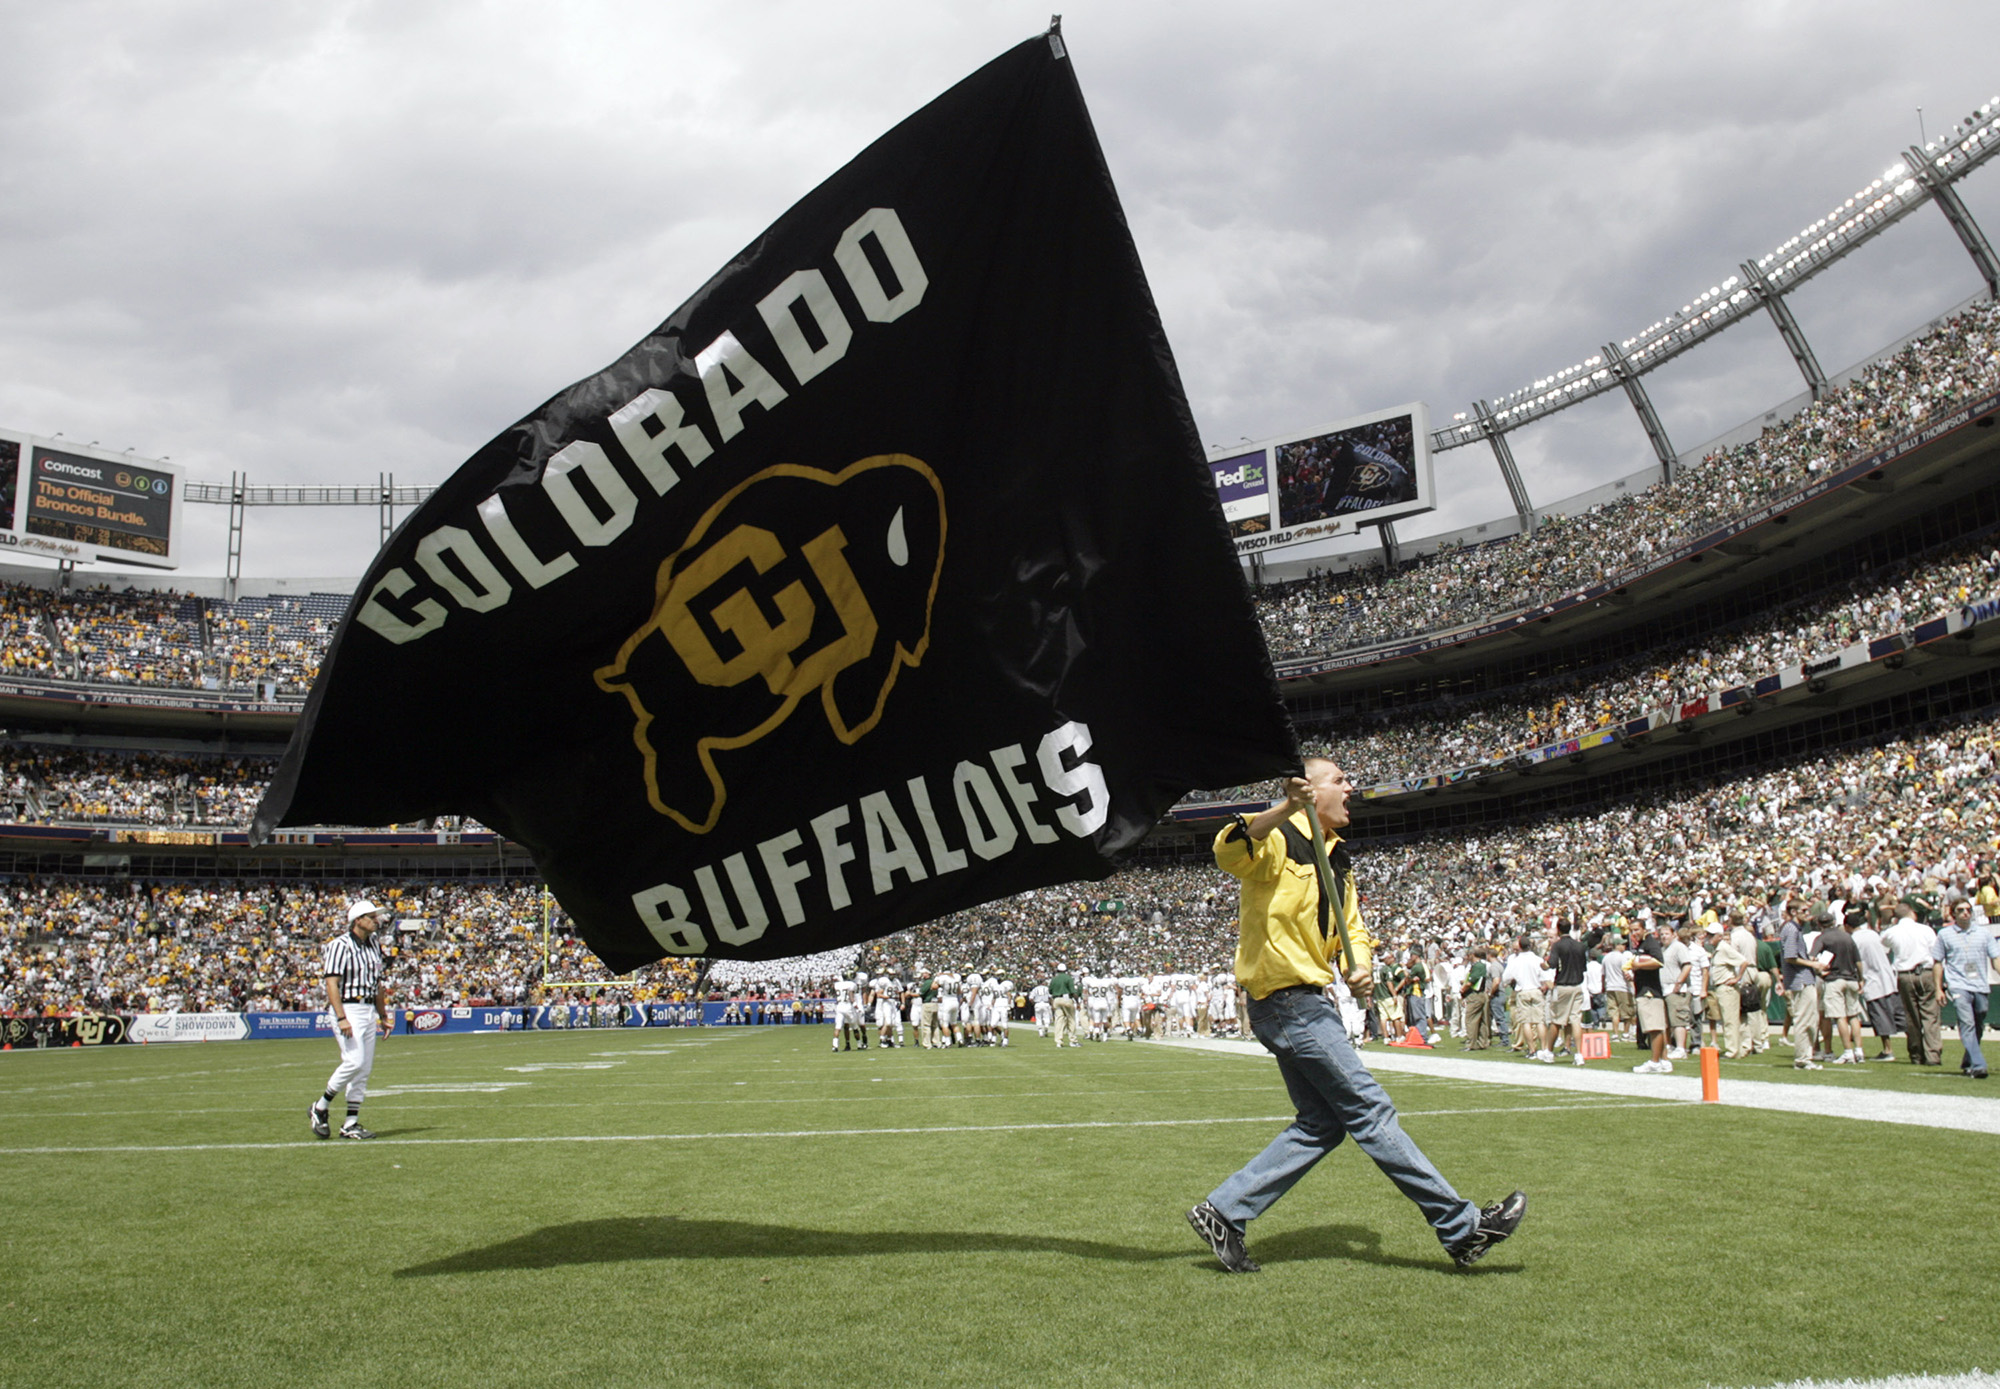 Colorado is leaving the Pac-12 to return to the conference the Buffaloes jilted a dozen years ago, and the Big 12 celebrated the reunion with a two-word statement released through Commissioner Brett Yomark: “They’re back.” (AP Photo/David Zalubowski, File)